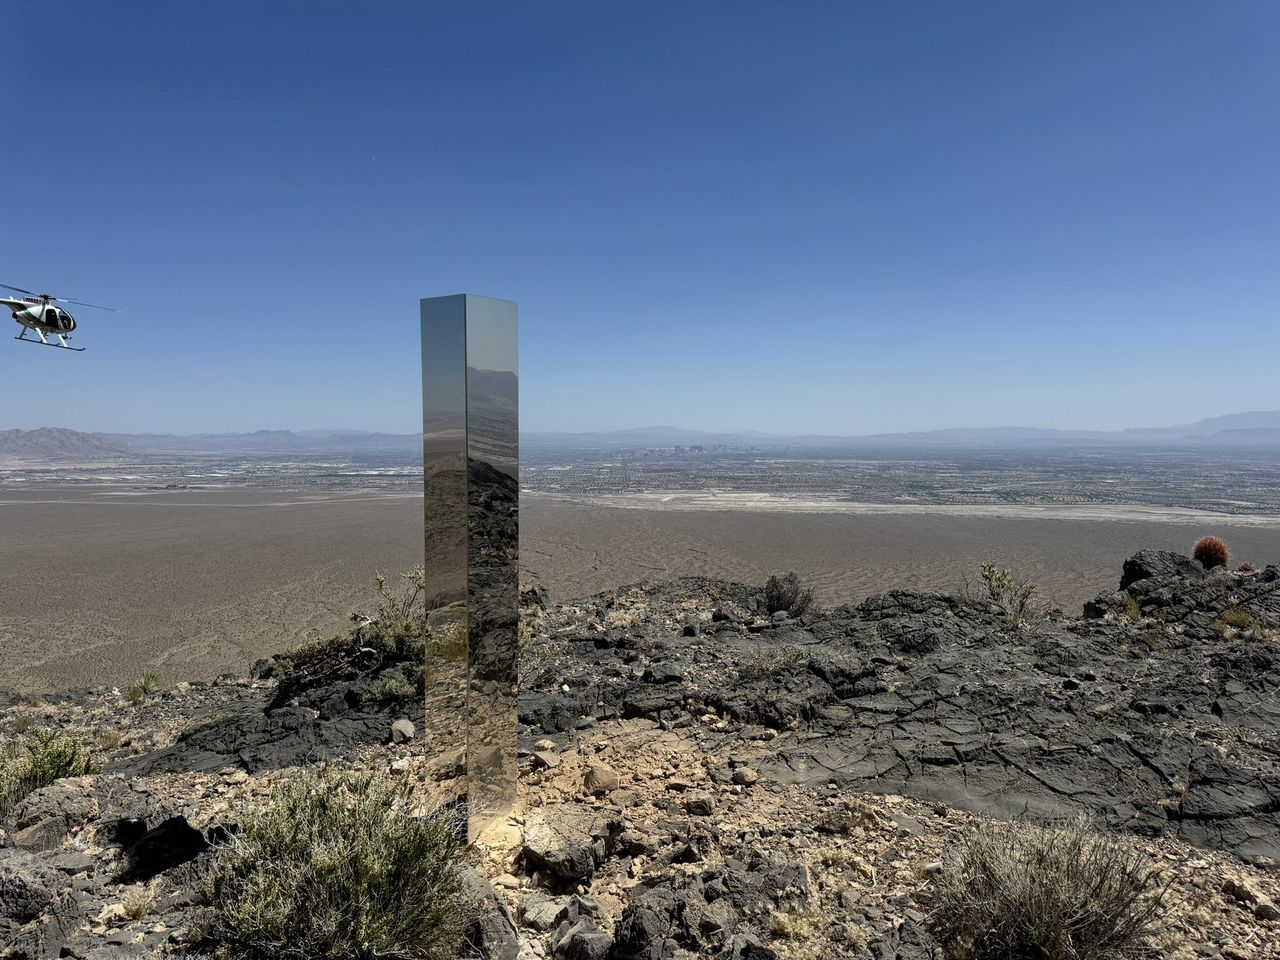 Shiny monolith discovered near Las Vegas sparks wild speculation